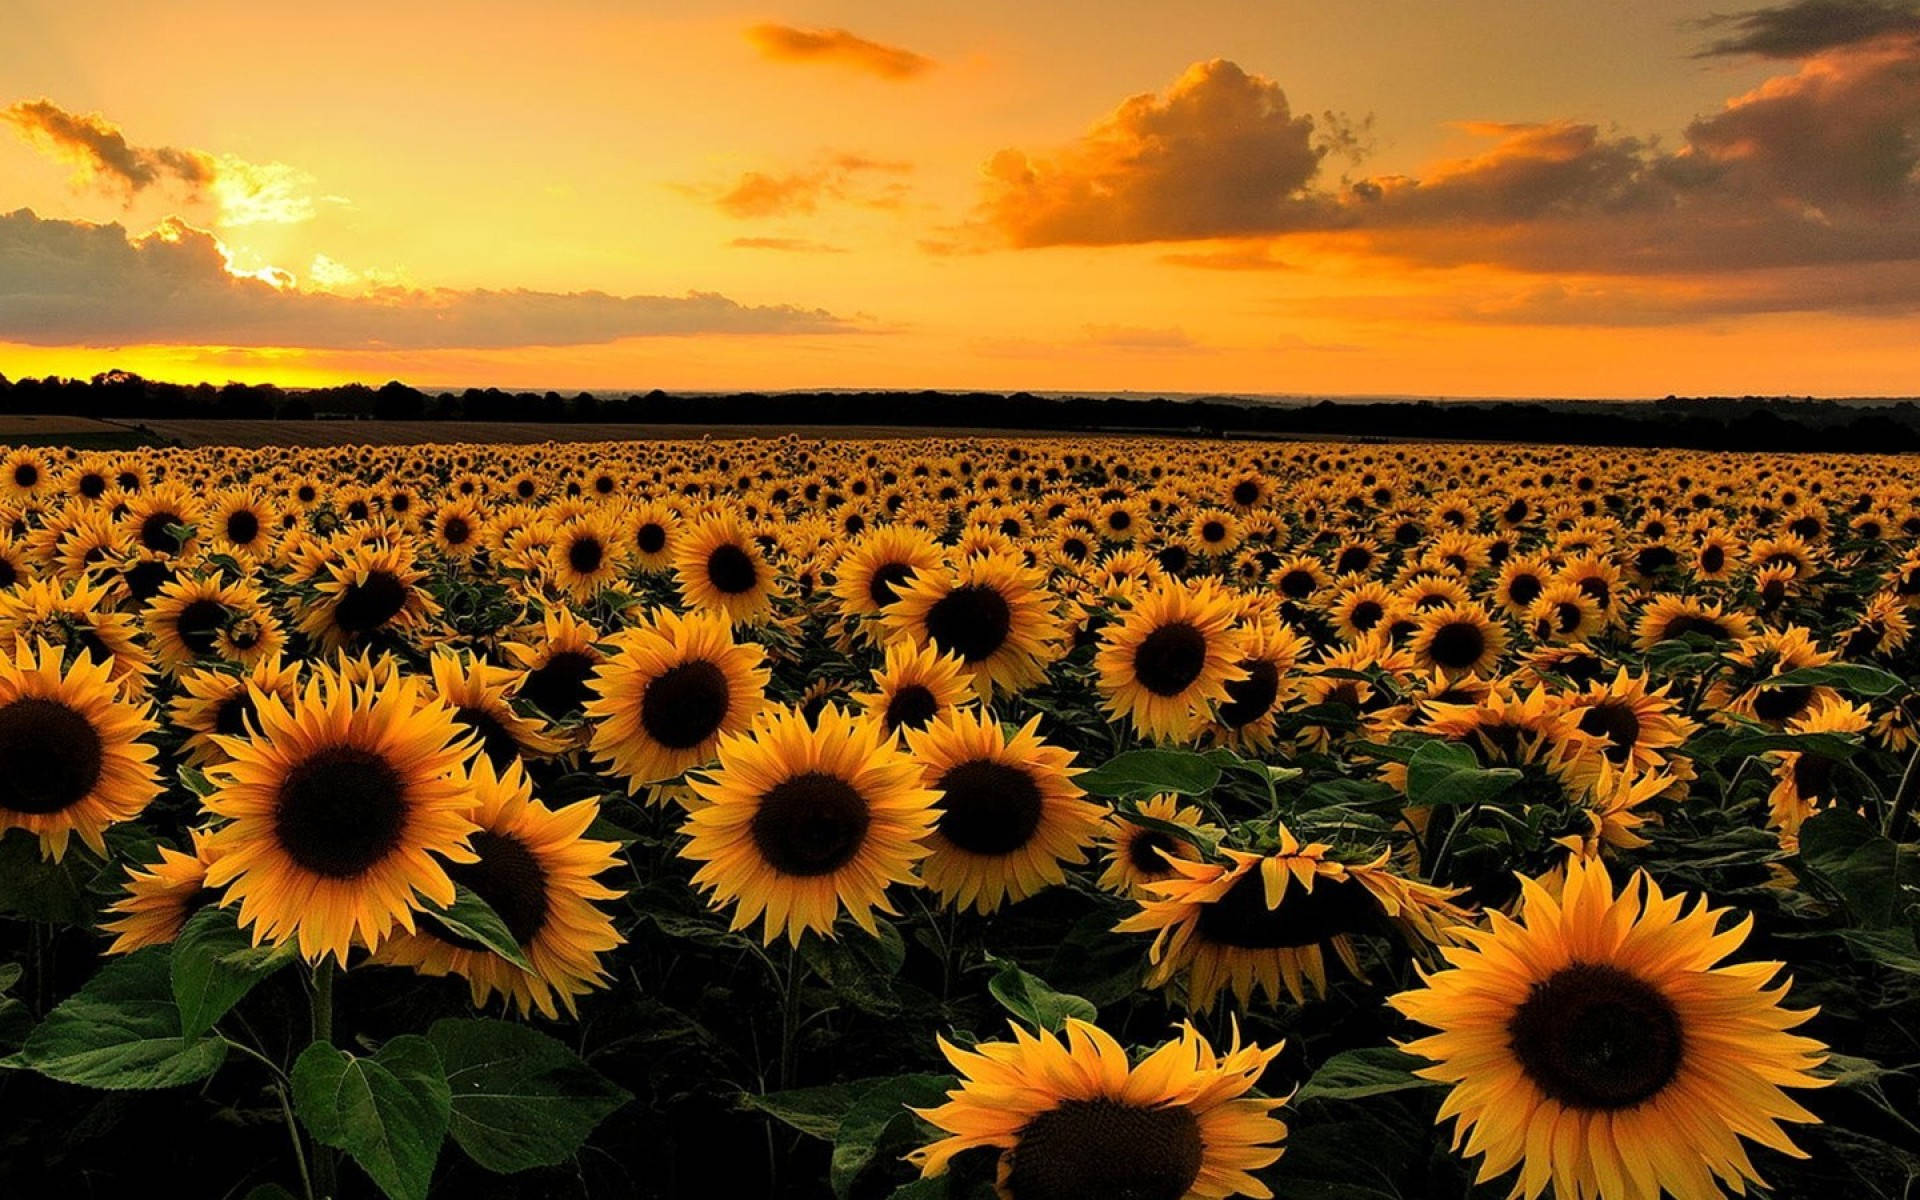 18 Sunflower Wallpapers For Your Phone | myphonewalls